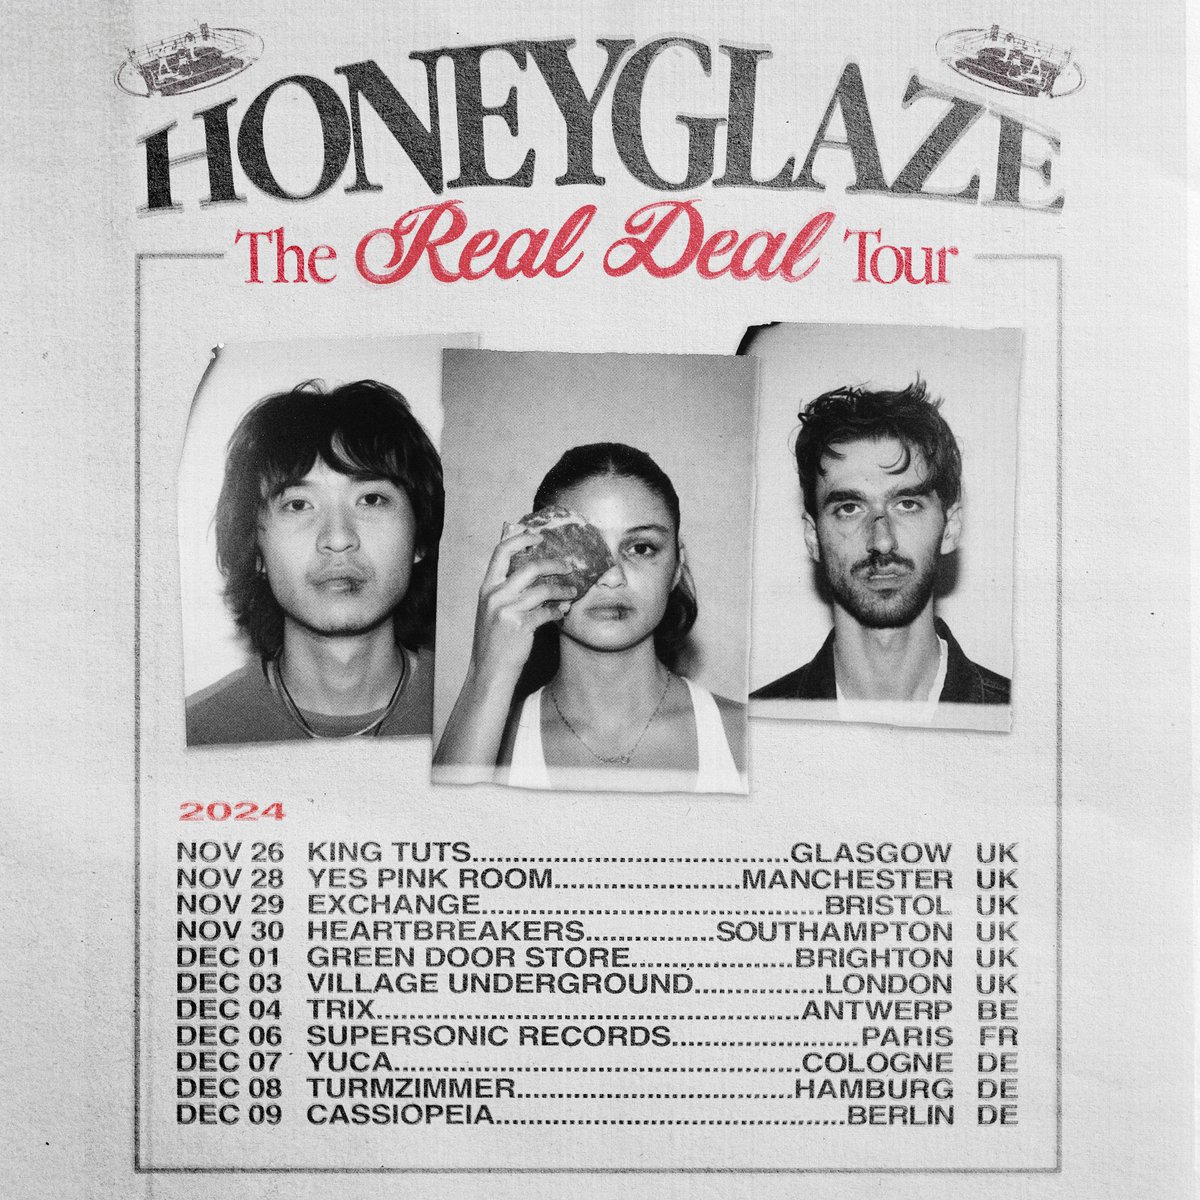 Welcome London based trio, @honeyglaze to the Fat Possum family. Listen to their new single 'Don’t' from their forthcoming album, Real Deal out Sep. 20th. Pre-order limited edition red vinyl from our web shop now.